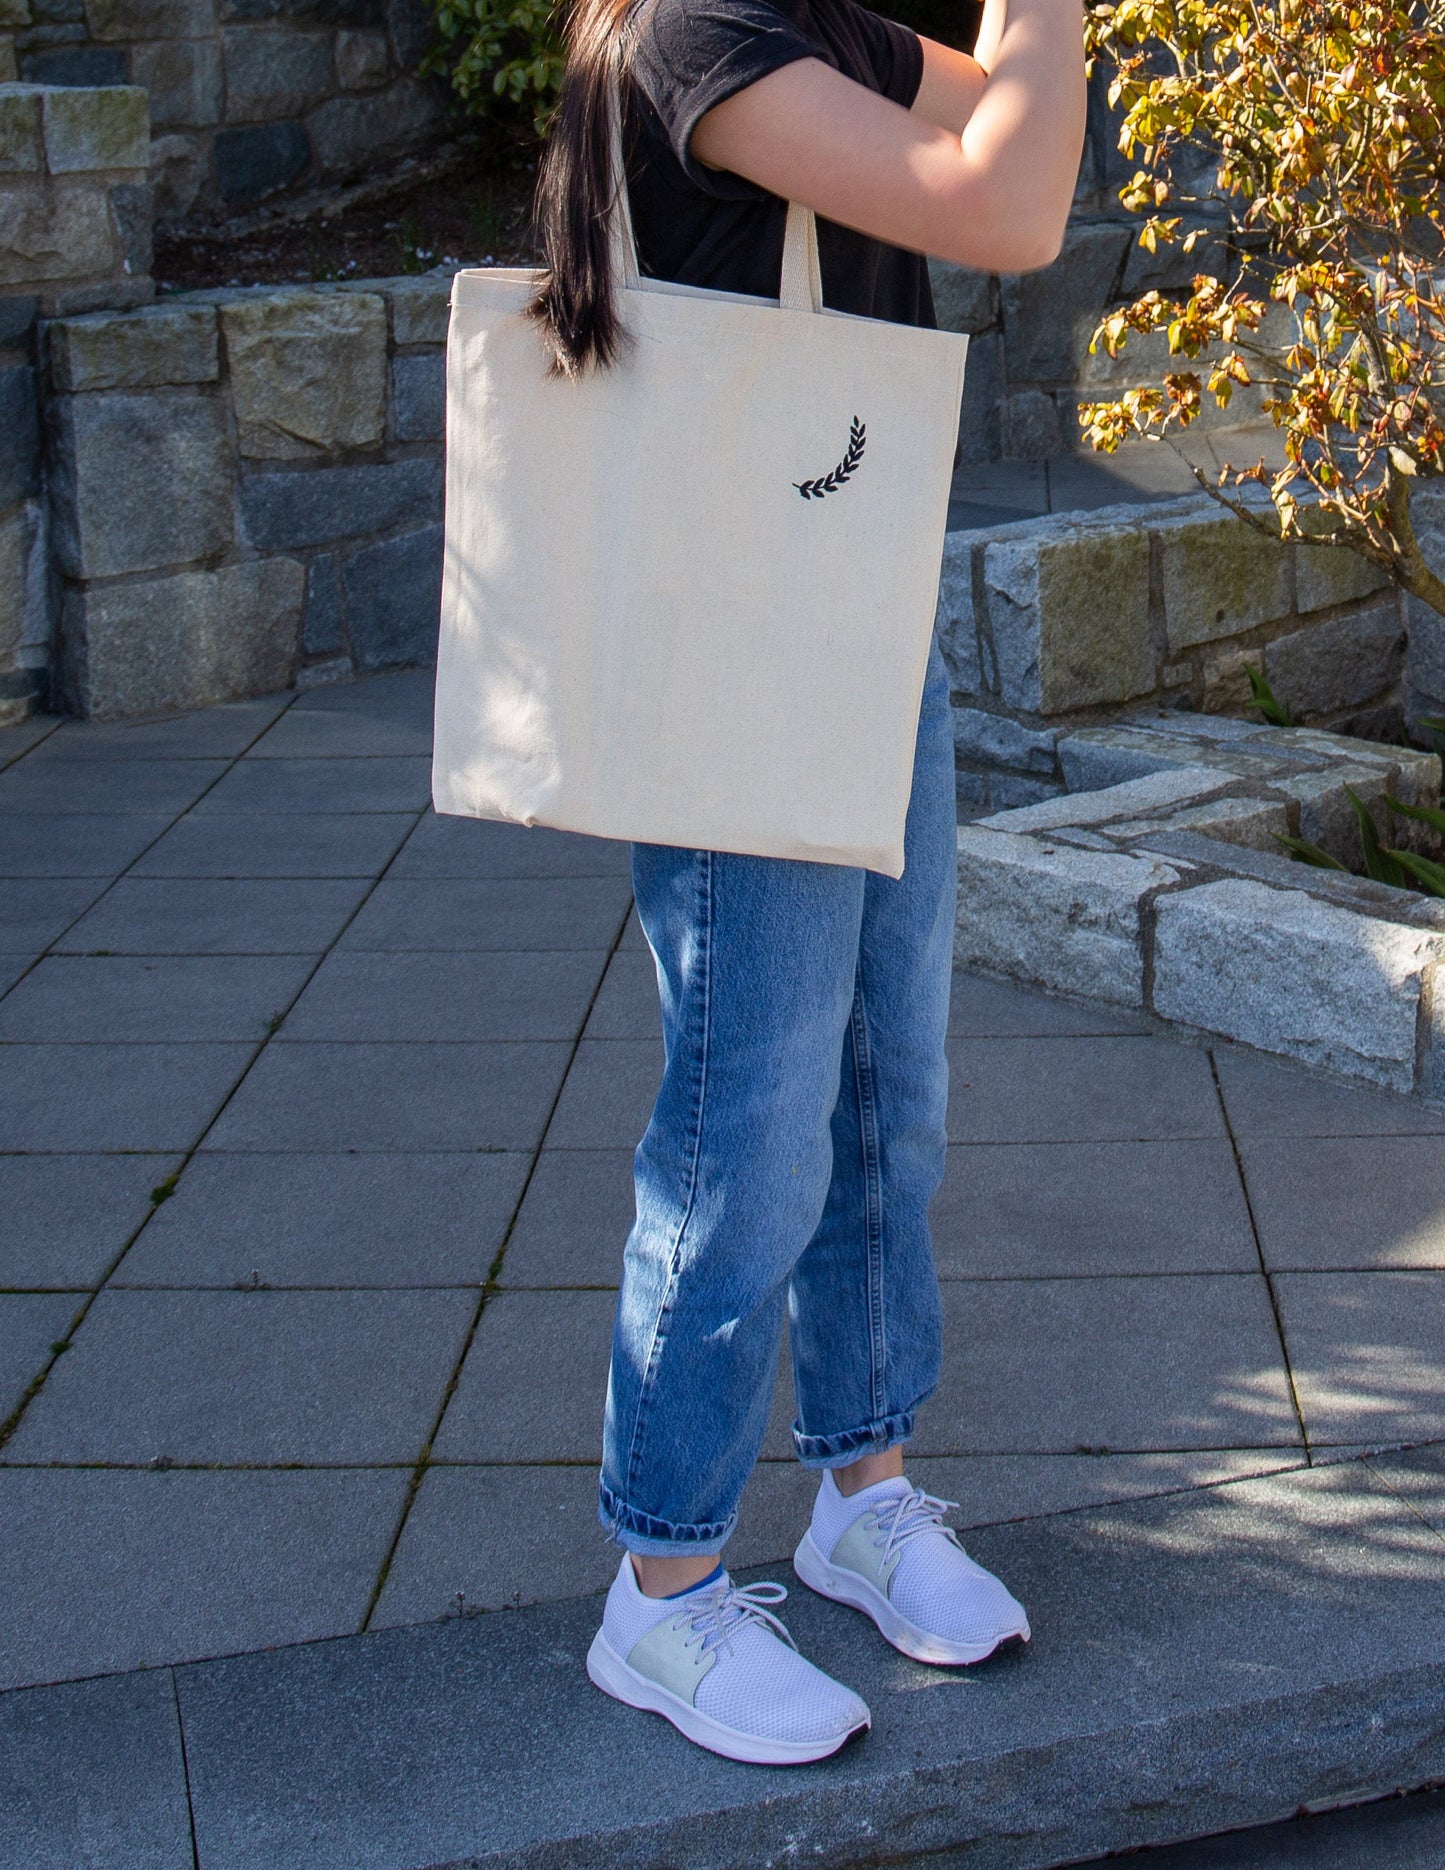 Embroidered Laurel Canvas Tote Bag